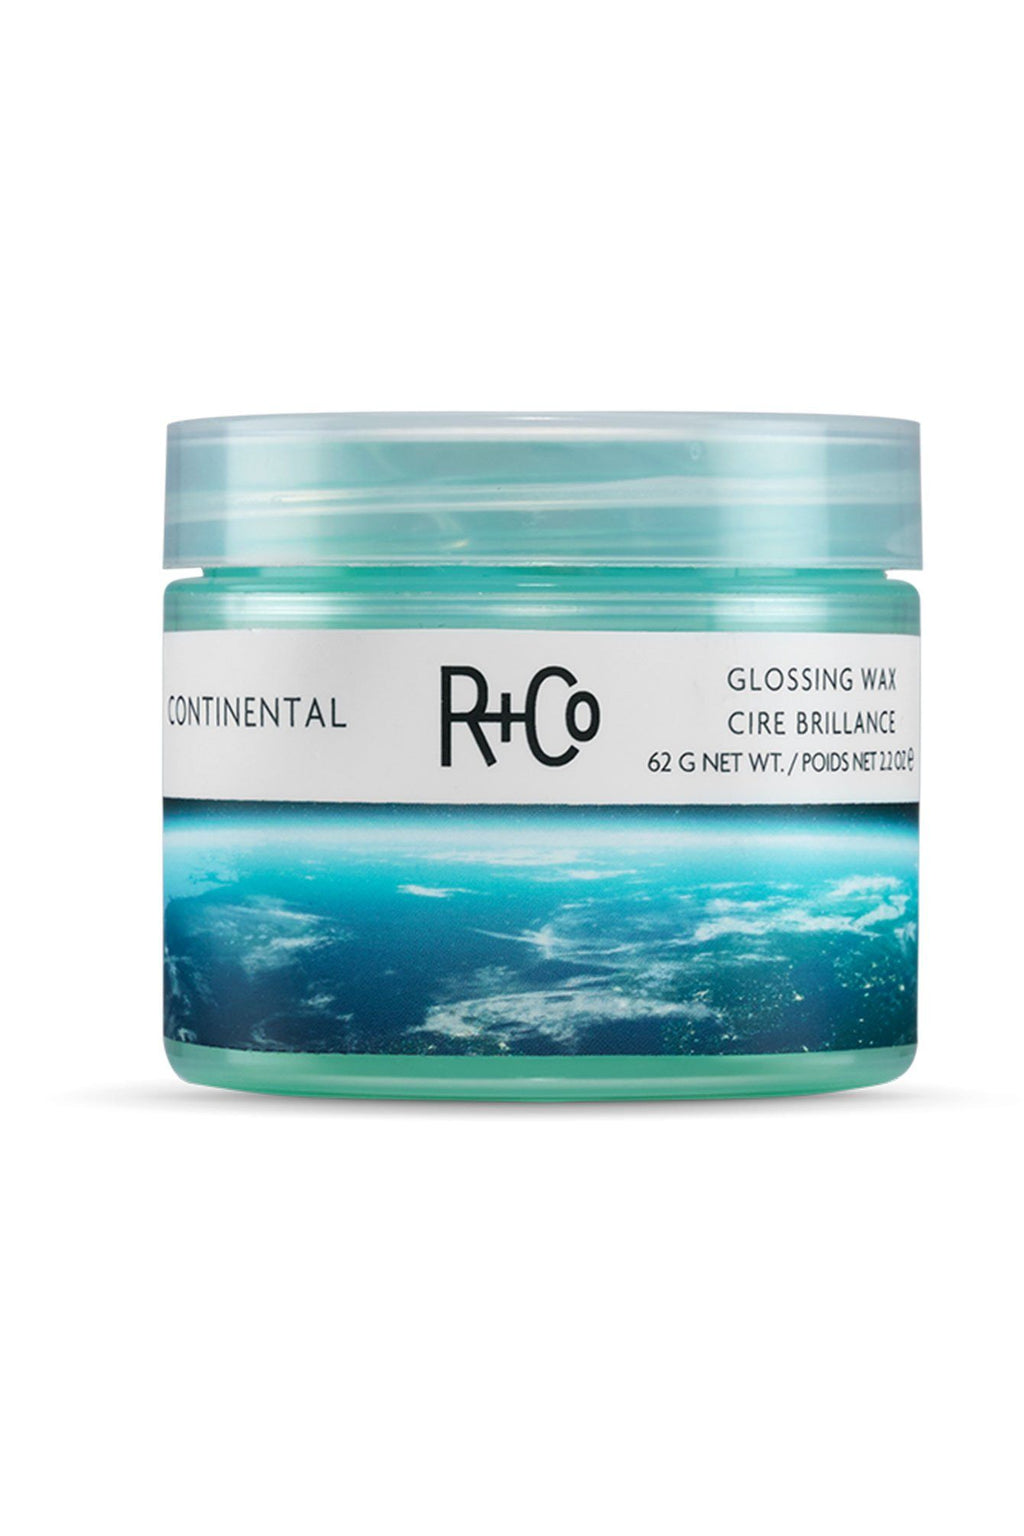 R+Co | Continental Glossing Wax